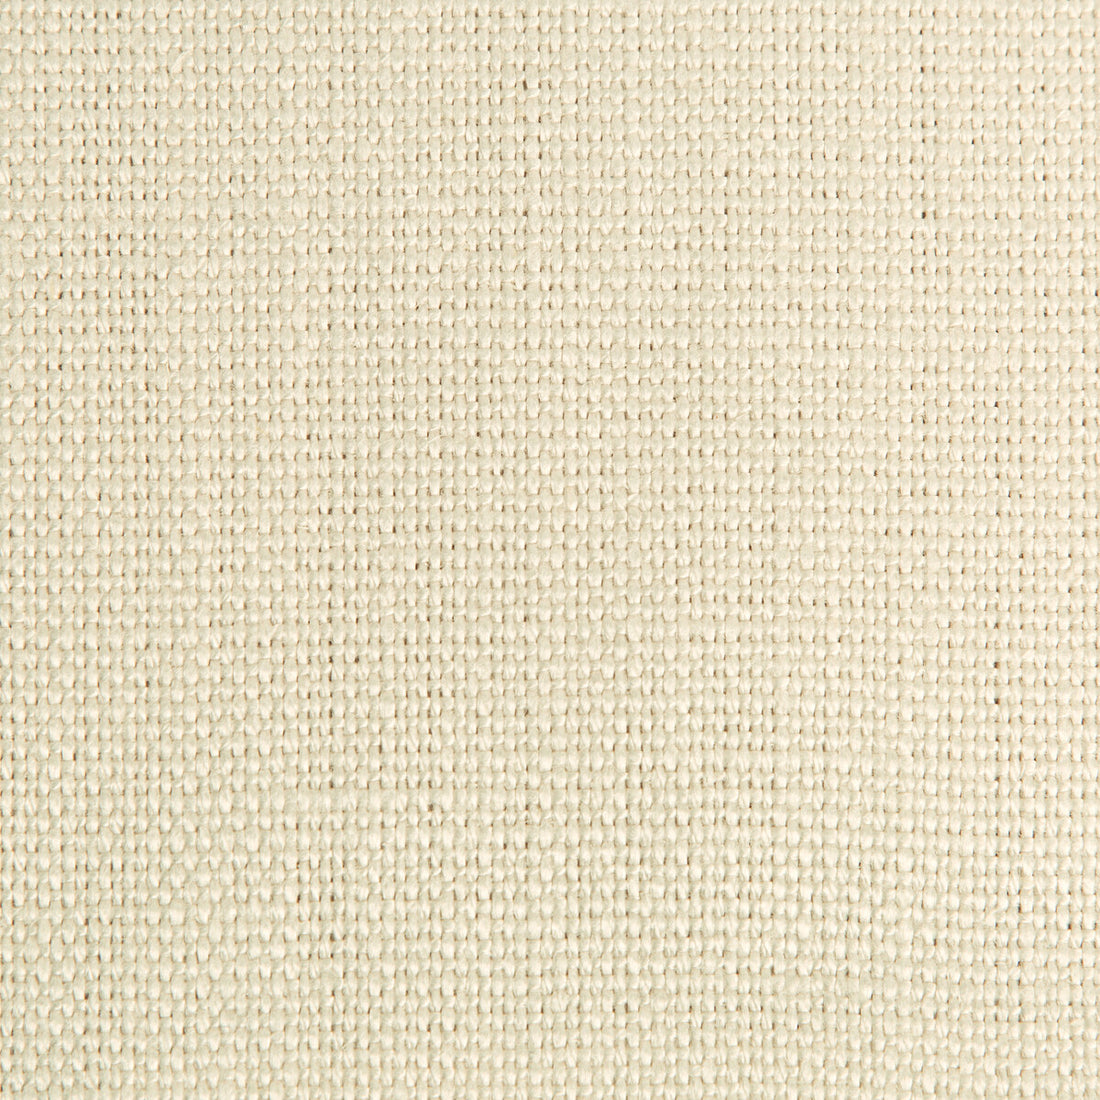 Hampton Linen fabric in flake color - pattern 2012171.1011.0 - by Lee Jofa in the Colour Complements II collection